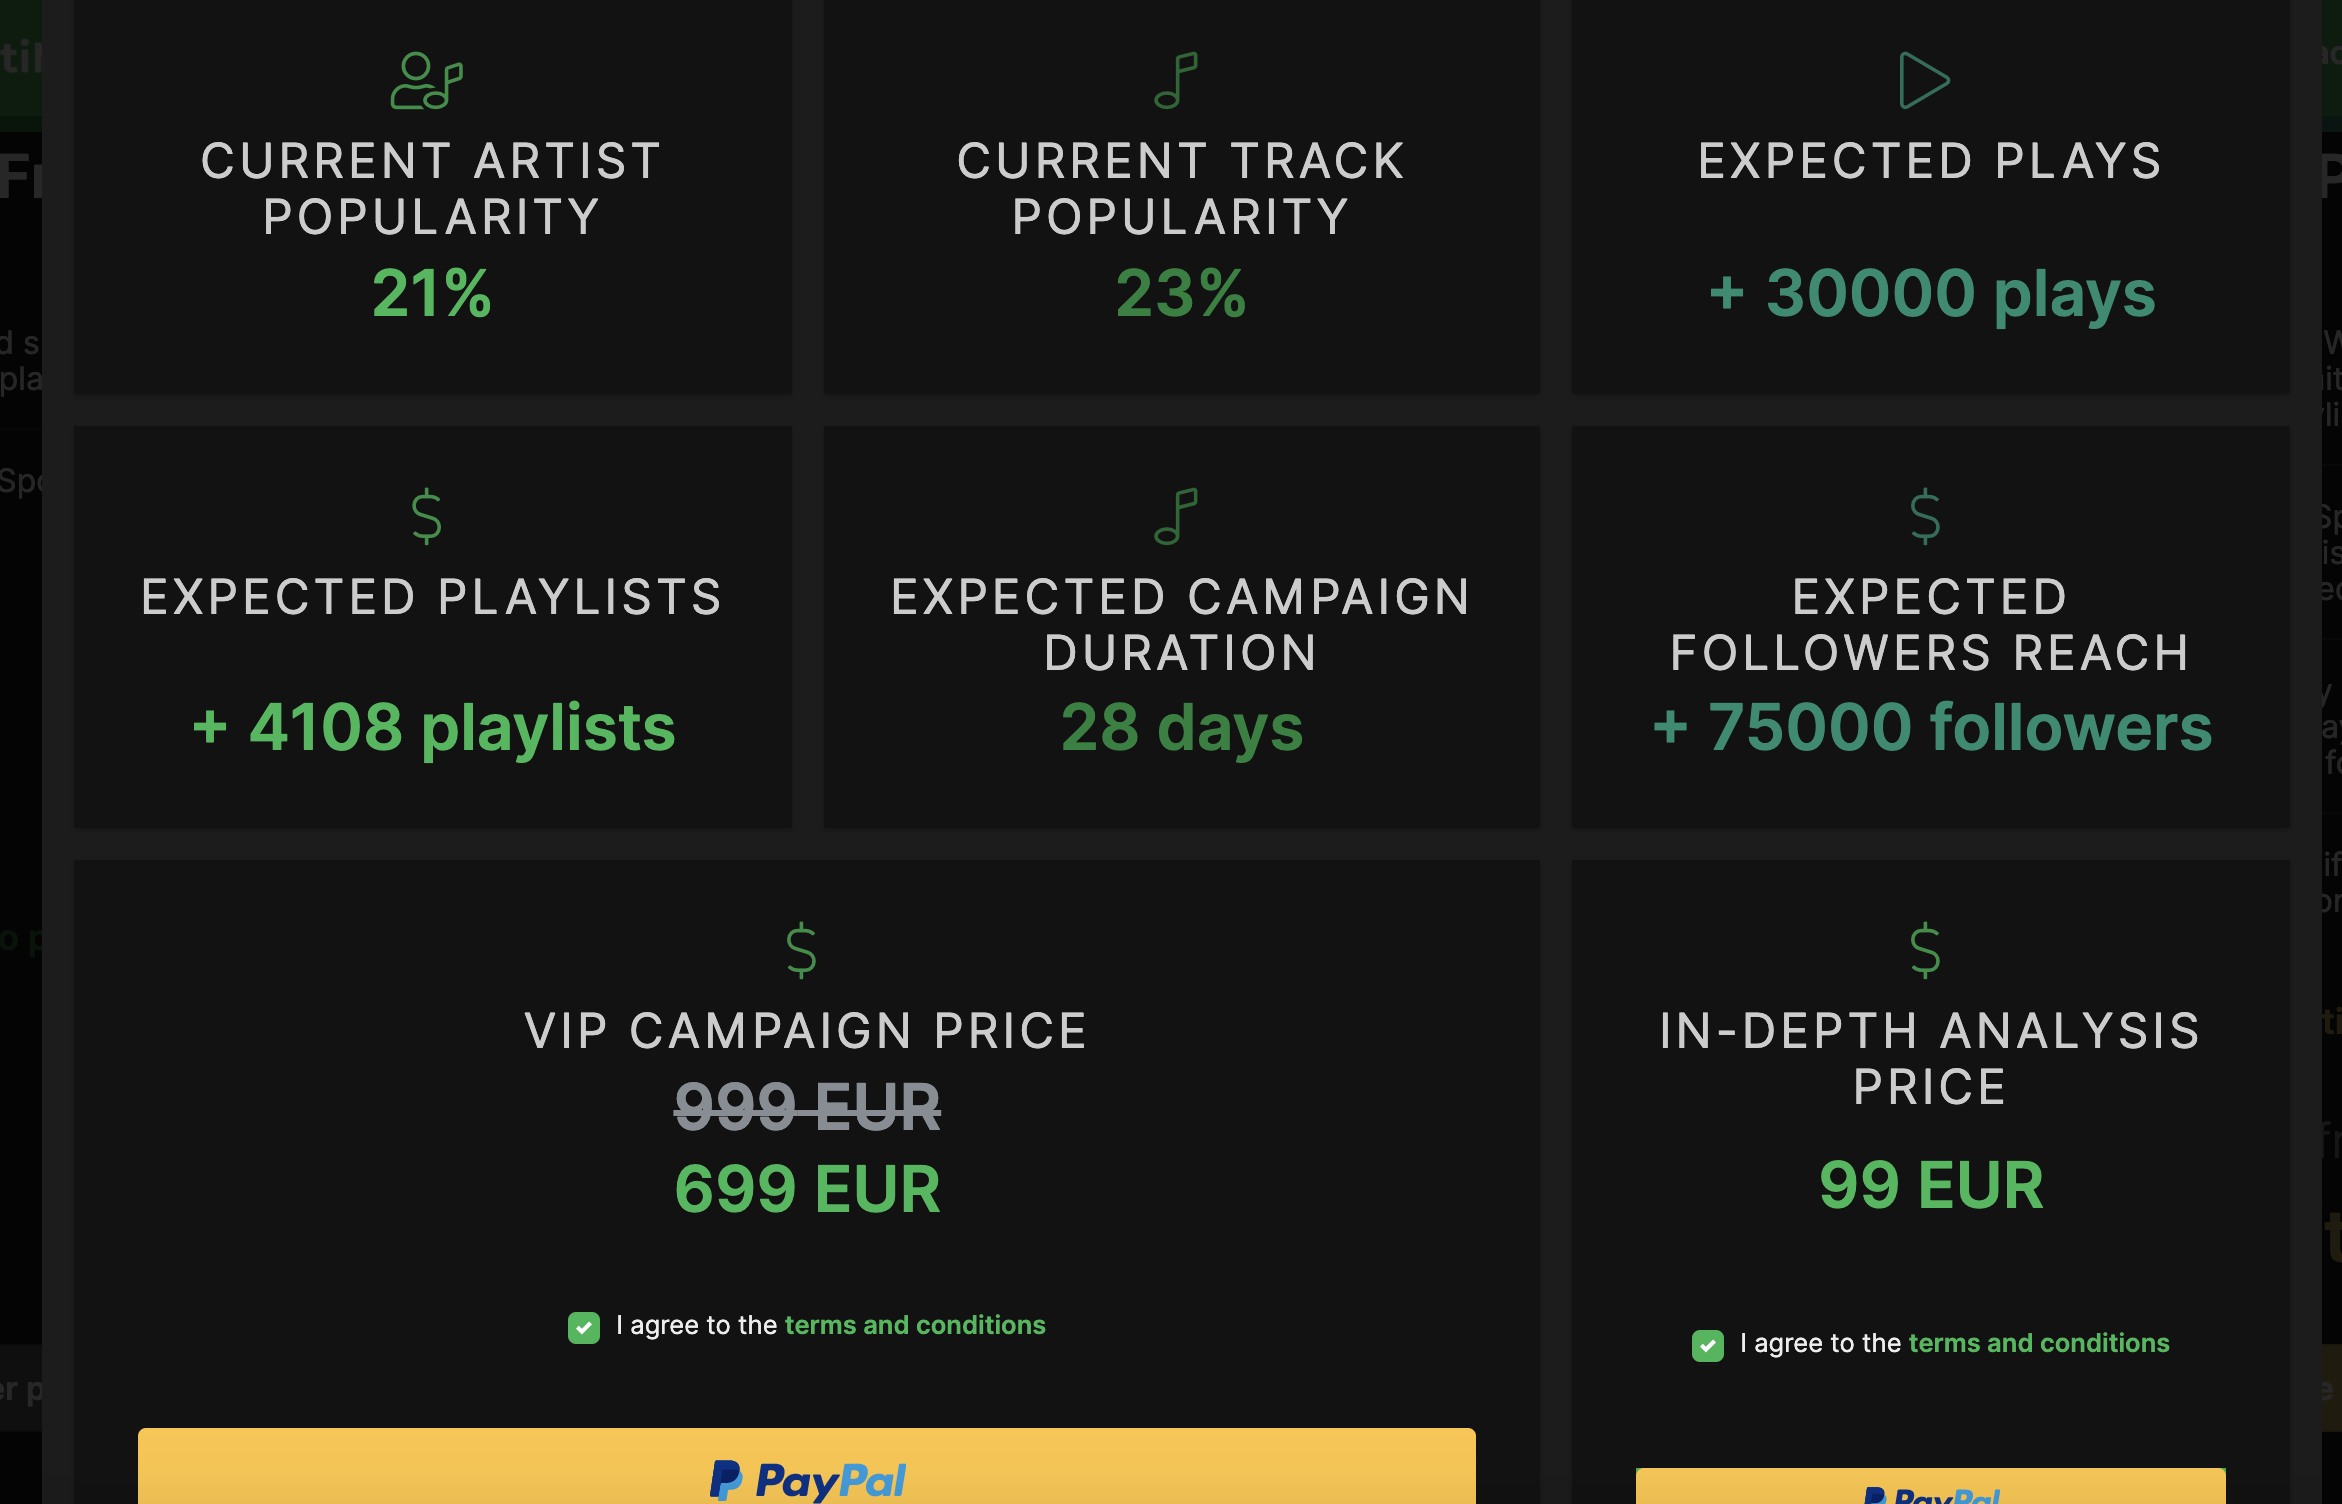 How can I check how many playlists added my song through the Matchfy.io VIP plan?